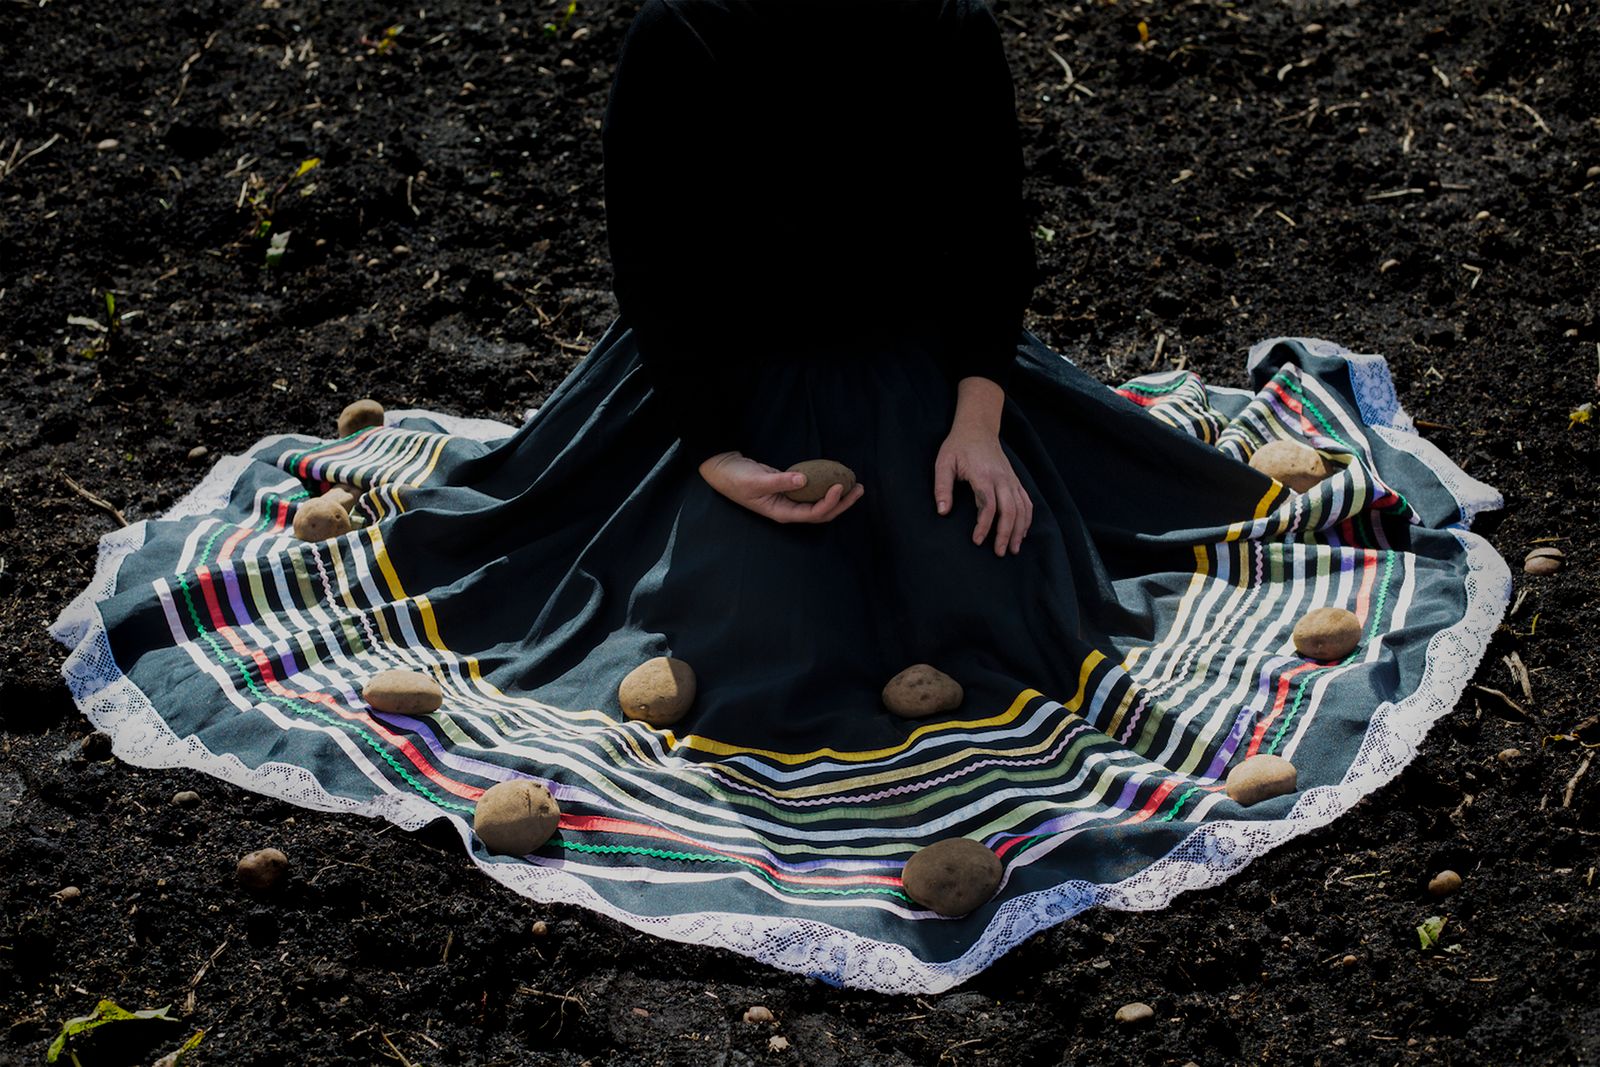 © Ana Nuñez Rodriguez - Image from the Cooking Potato Stories photography project